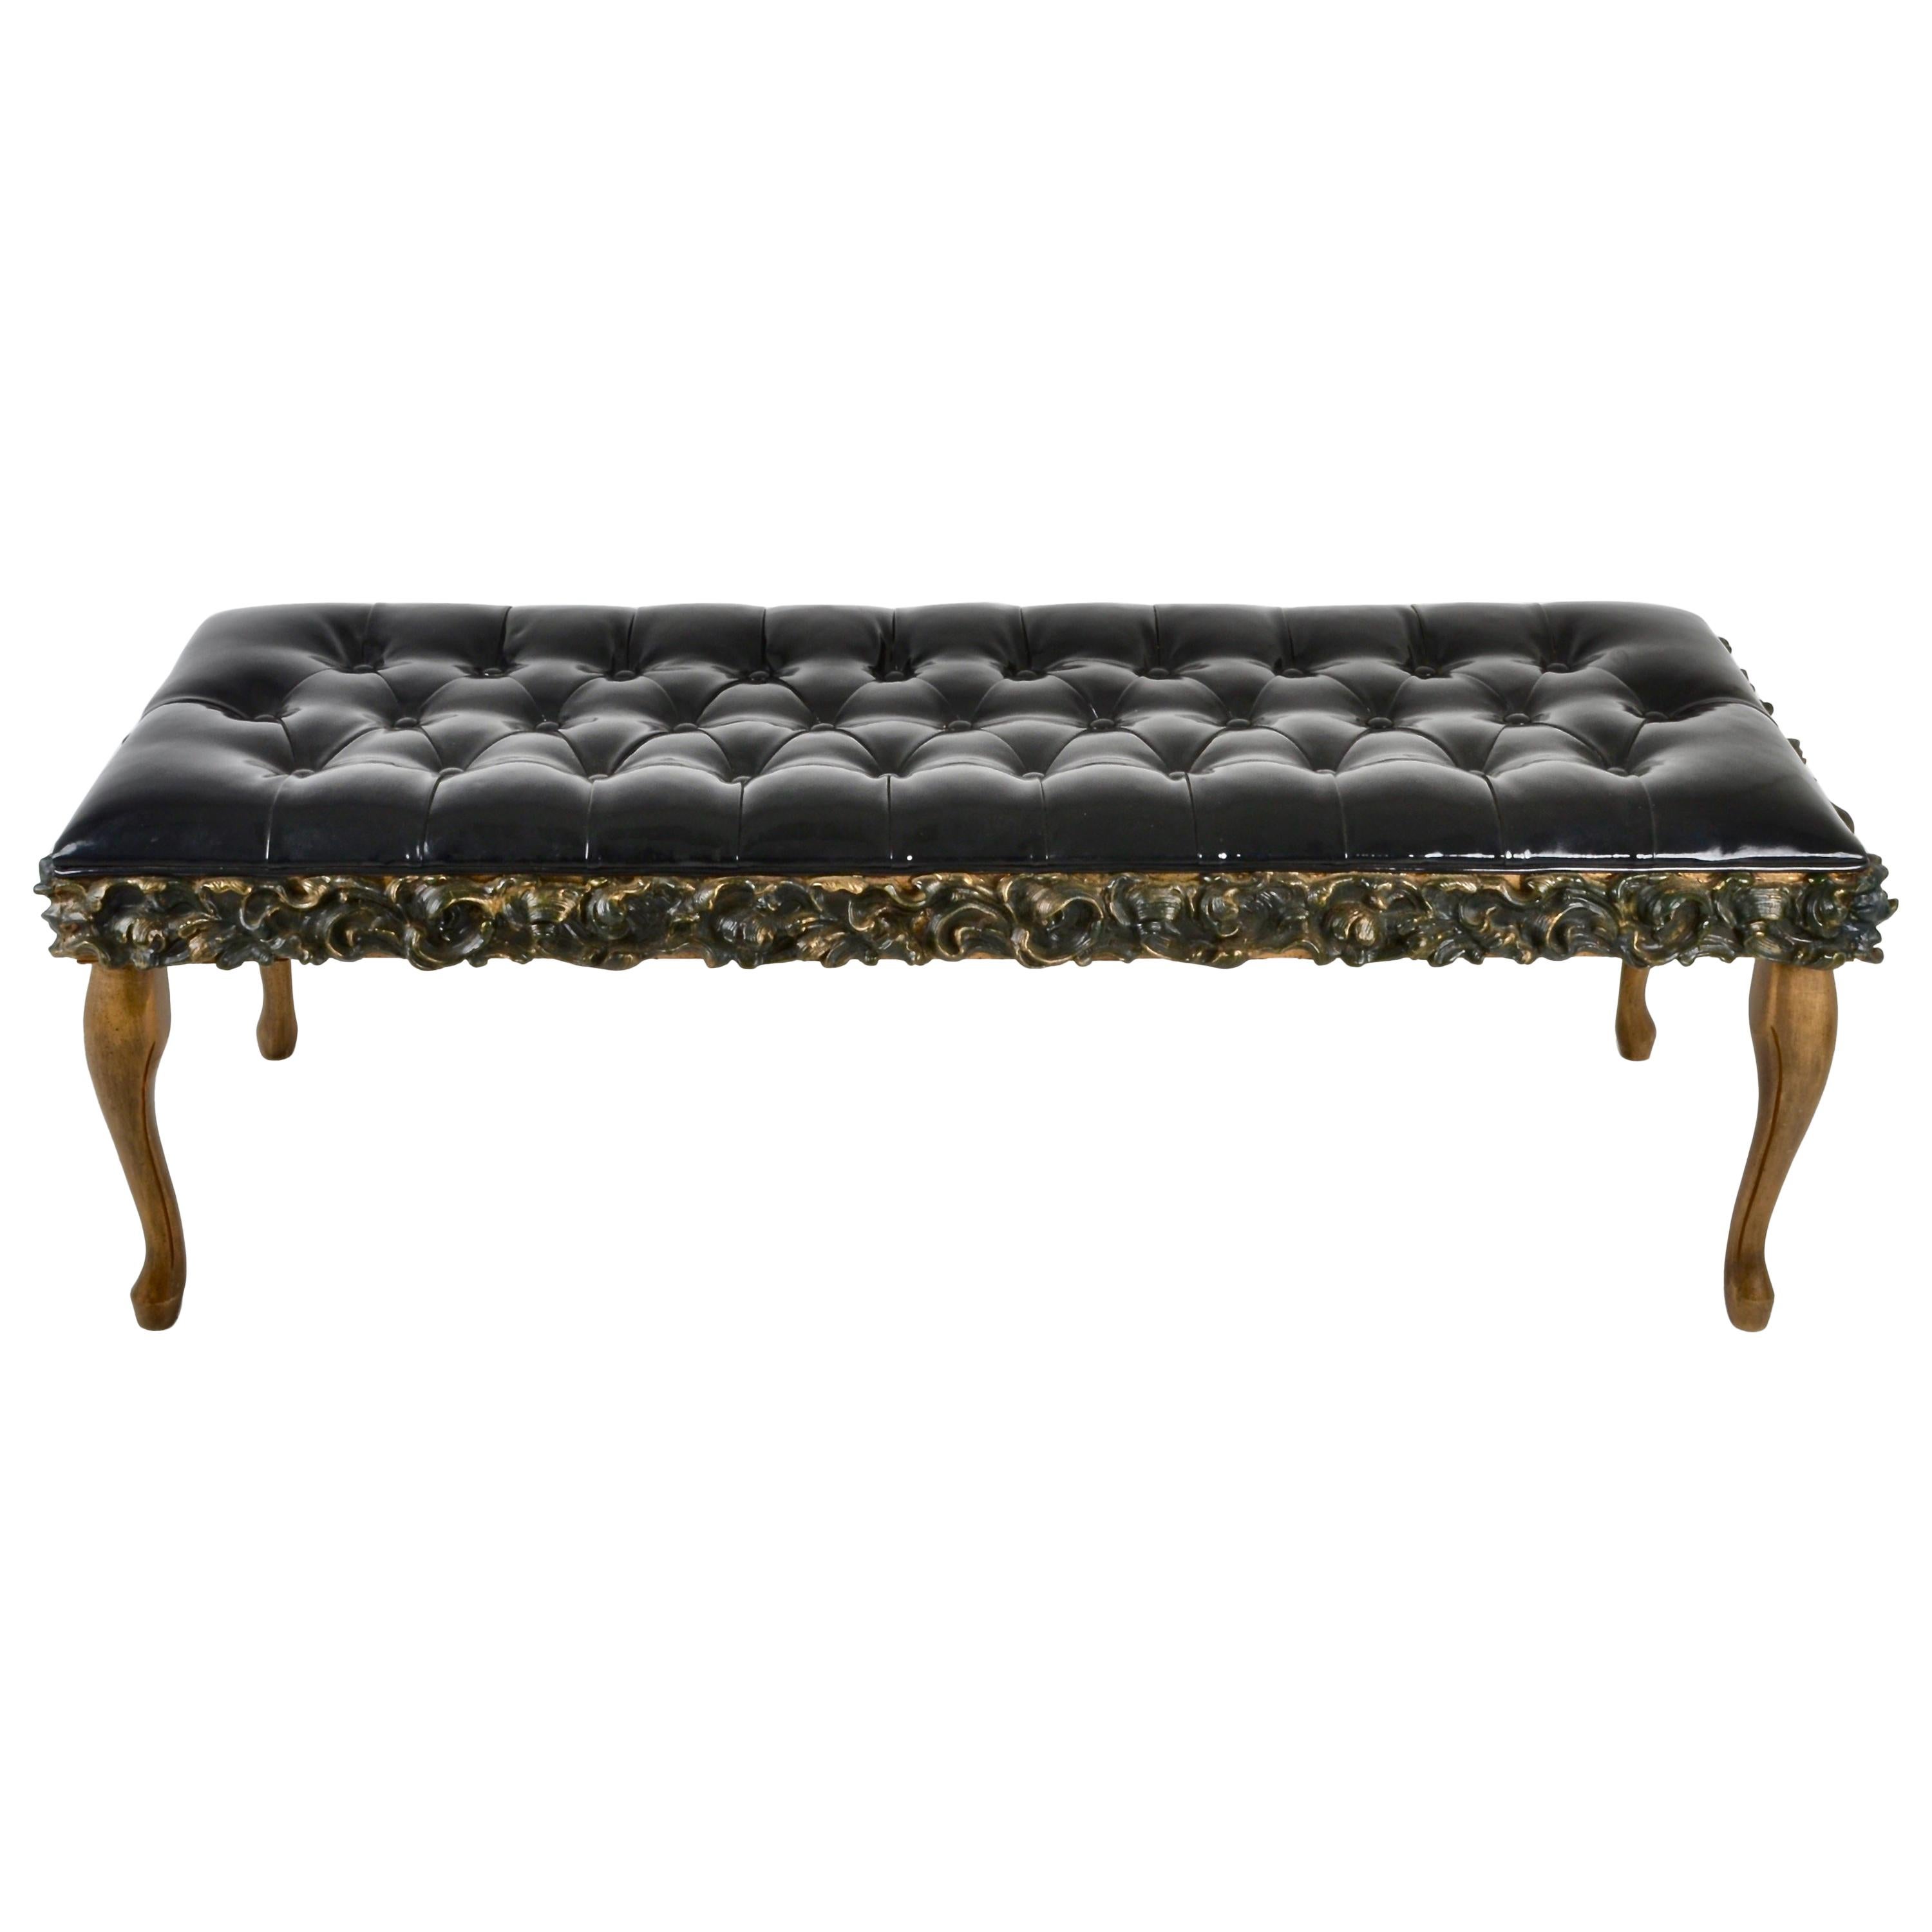 Tufted Bench with Figured Polychromed Base and Patent Leather Cover